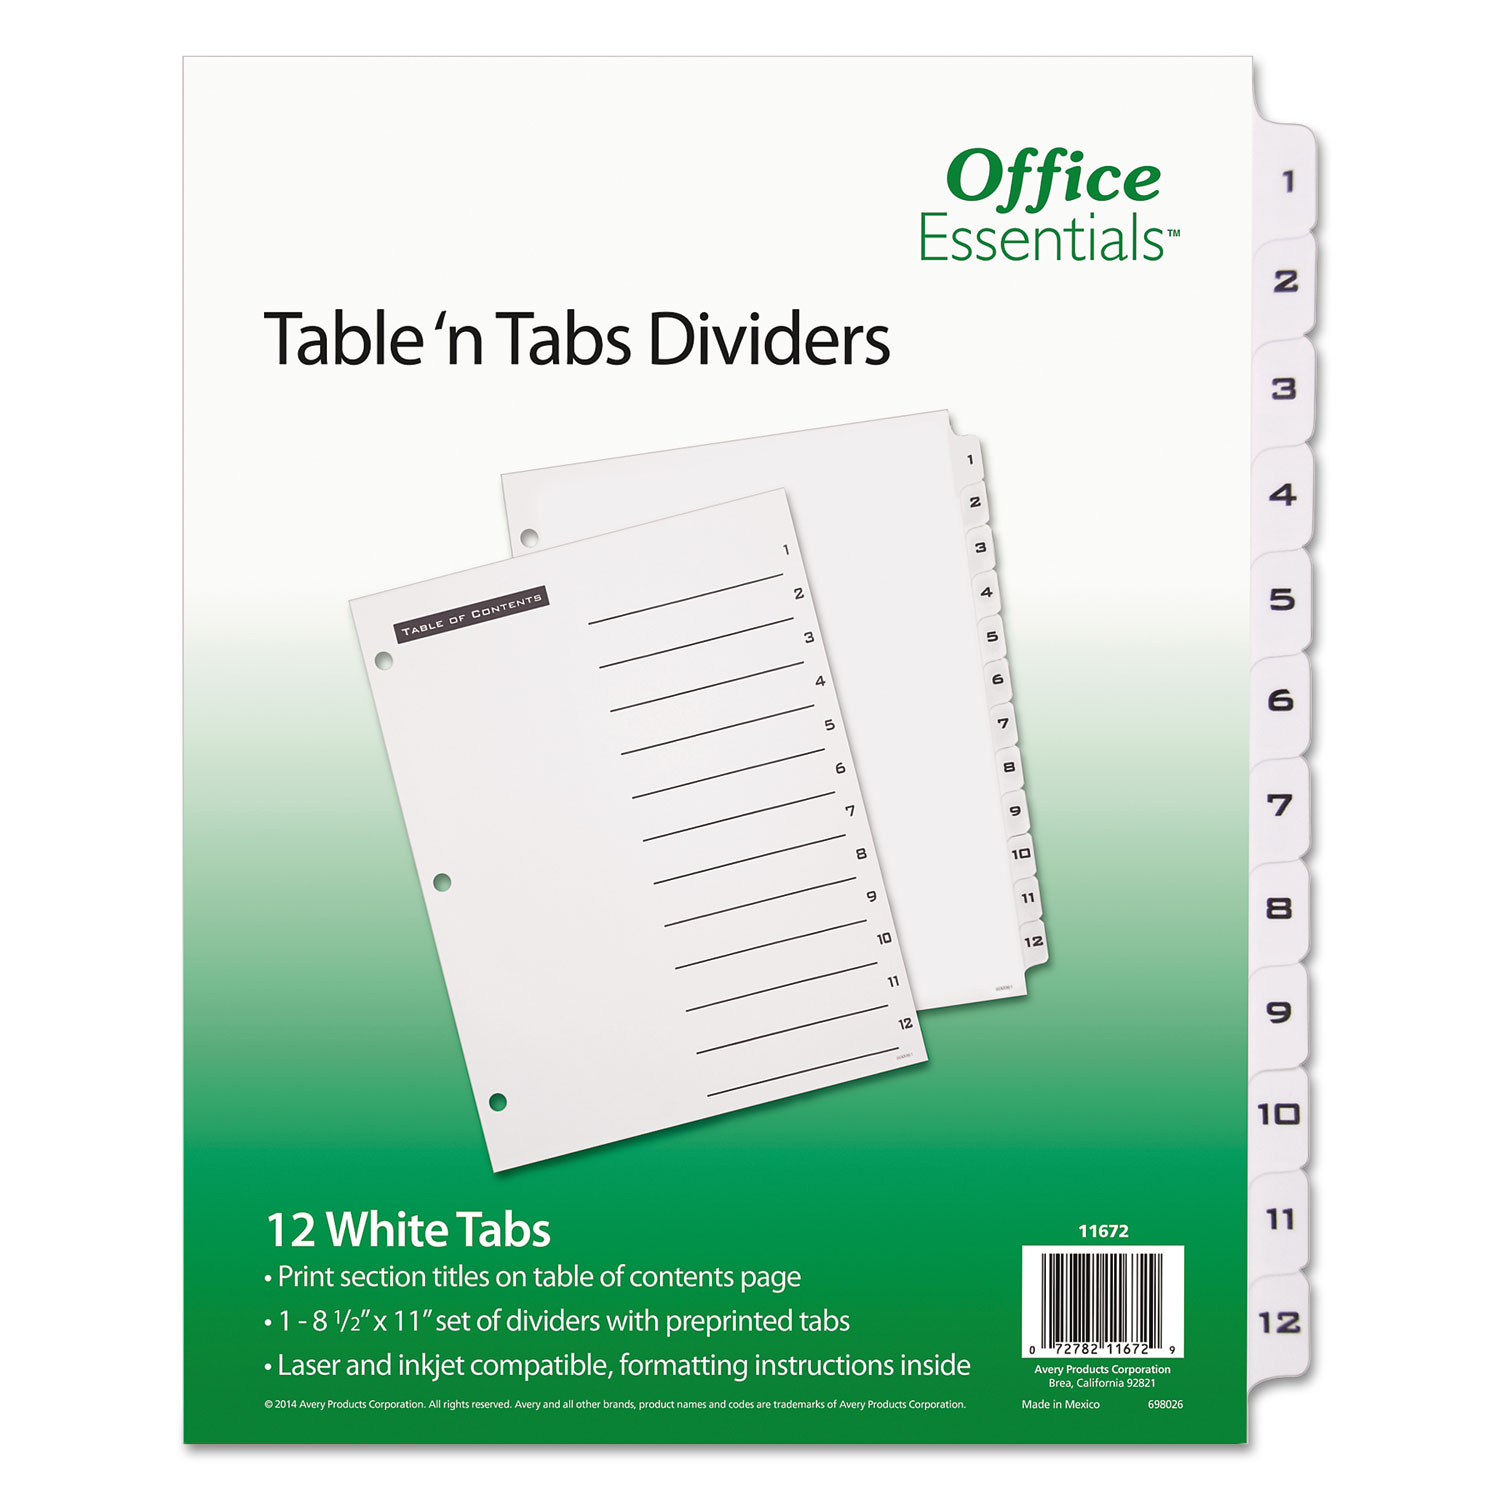  Office Essentials 11672 Table 'n Tabs Dividers, 12-Tab, 1 to 12, 11 x 8.5, White, 1 Set (AVE11672) 